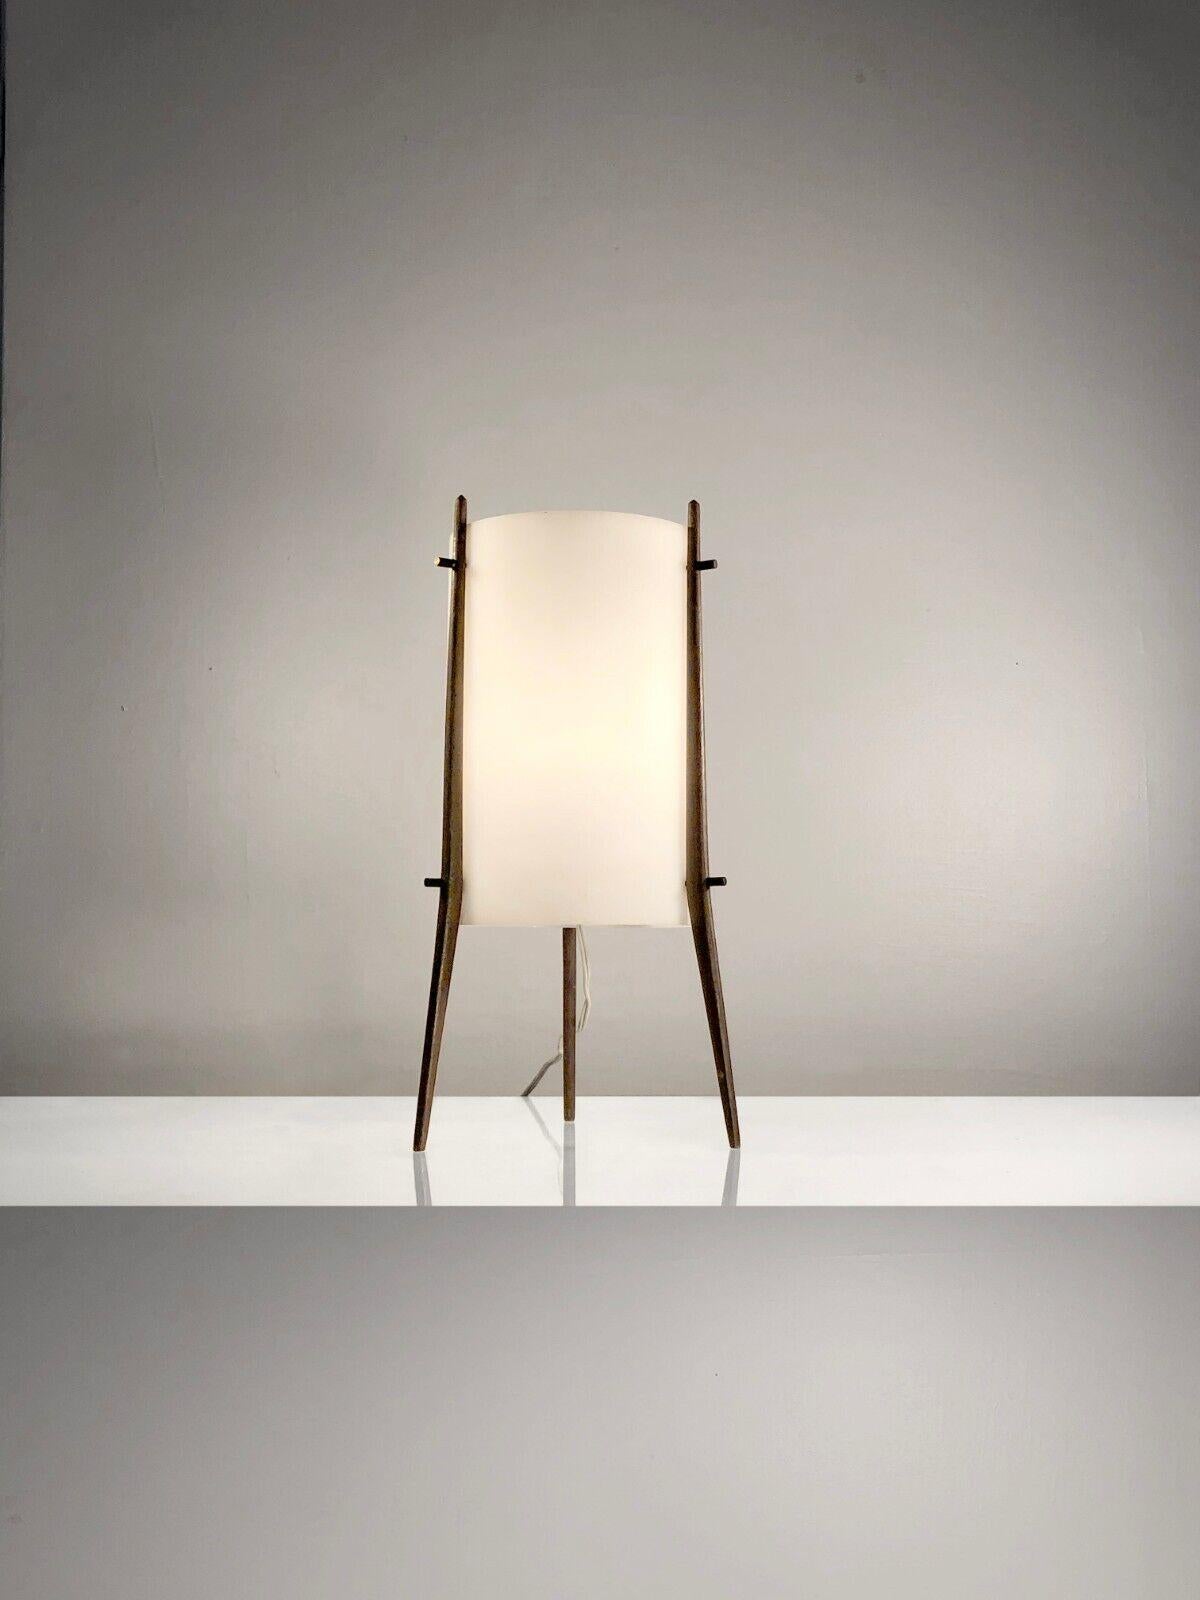 A small tripod table lamp or night light, Modernist, Space-Age, Fifties, cylinder in white satin perspex diffusing light mounted on 3 elegant teak legs, stamped Alfaplex Milano, Italy 1950-1960.